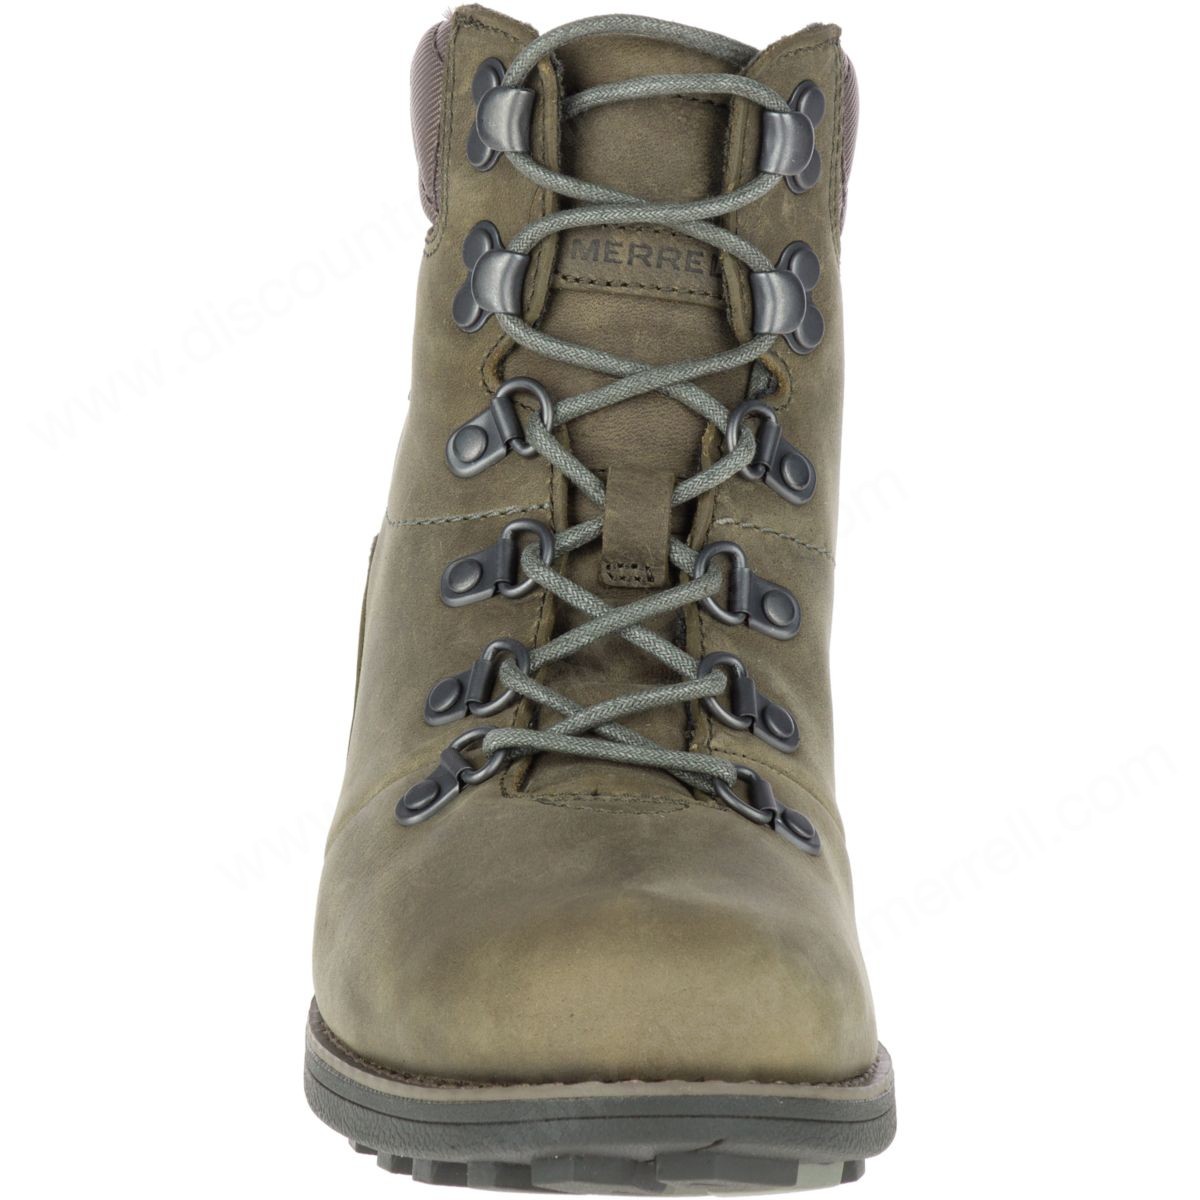 Merrell Woman's Chateau Mid Lace Waterproof Dusty Olive - -4